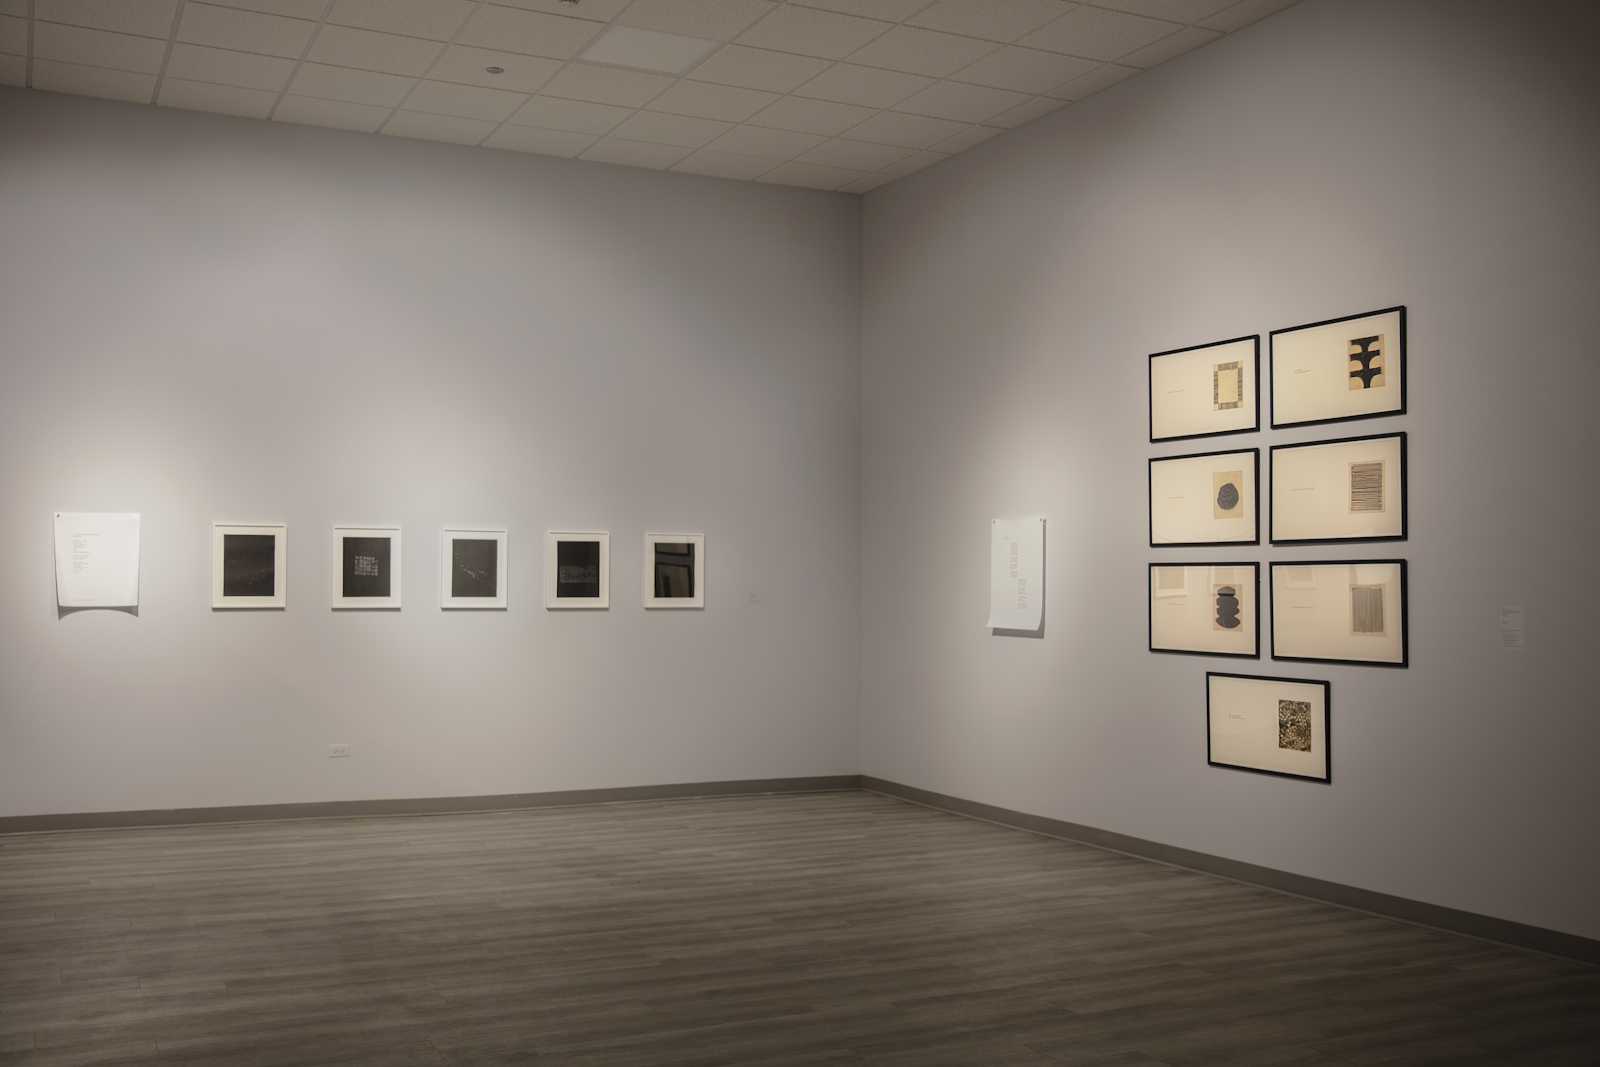 Image: Installation View, Testimonies on Paper, 2023. South Asia Institute, Chicago. A view of two walls in the Testimonies on Paper exhibition. On the left wall, a poem on white paper is positioned to the left of five black etchings. On the right wall, seven etchings with subtitles are placed in a stacked fashion. To their left is a poem on a white paper. Courtesy: South Asia Institute.